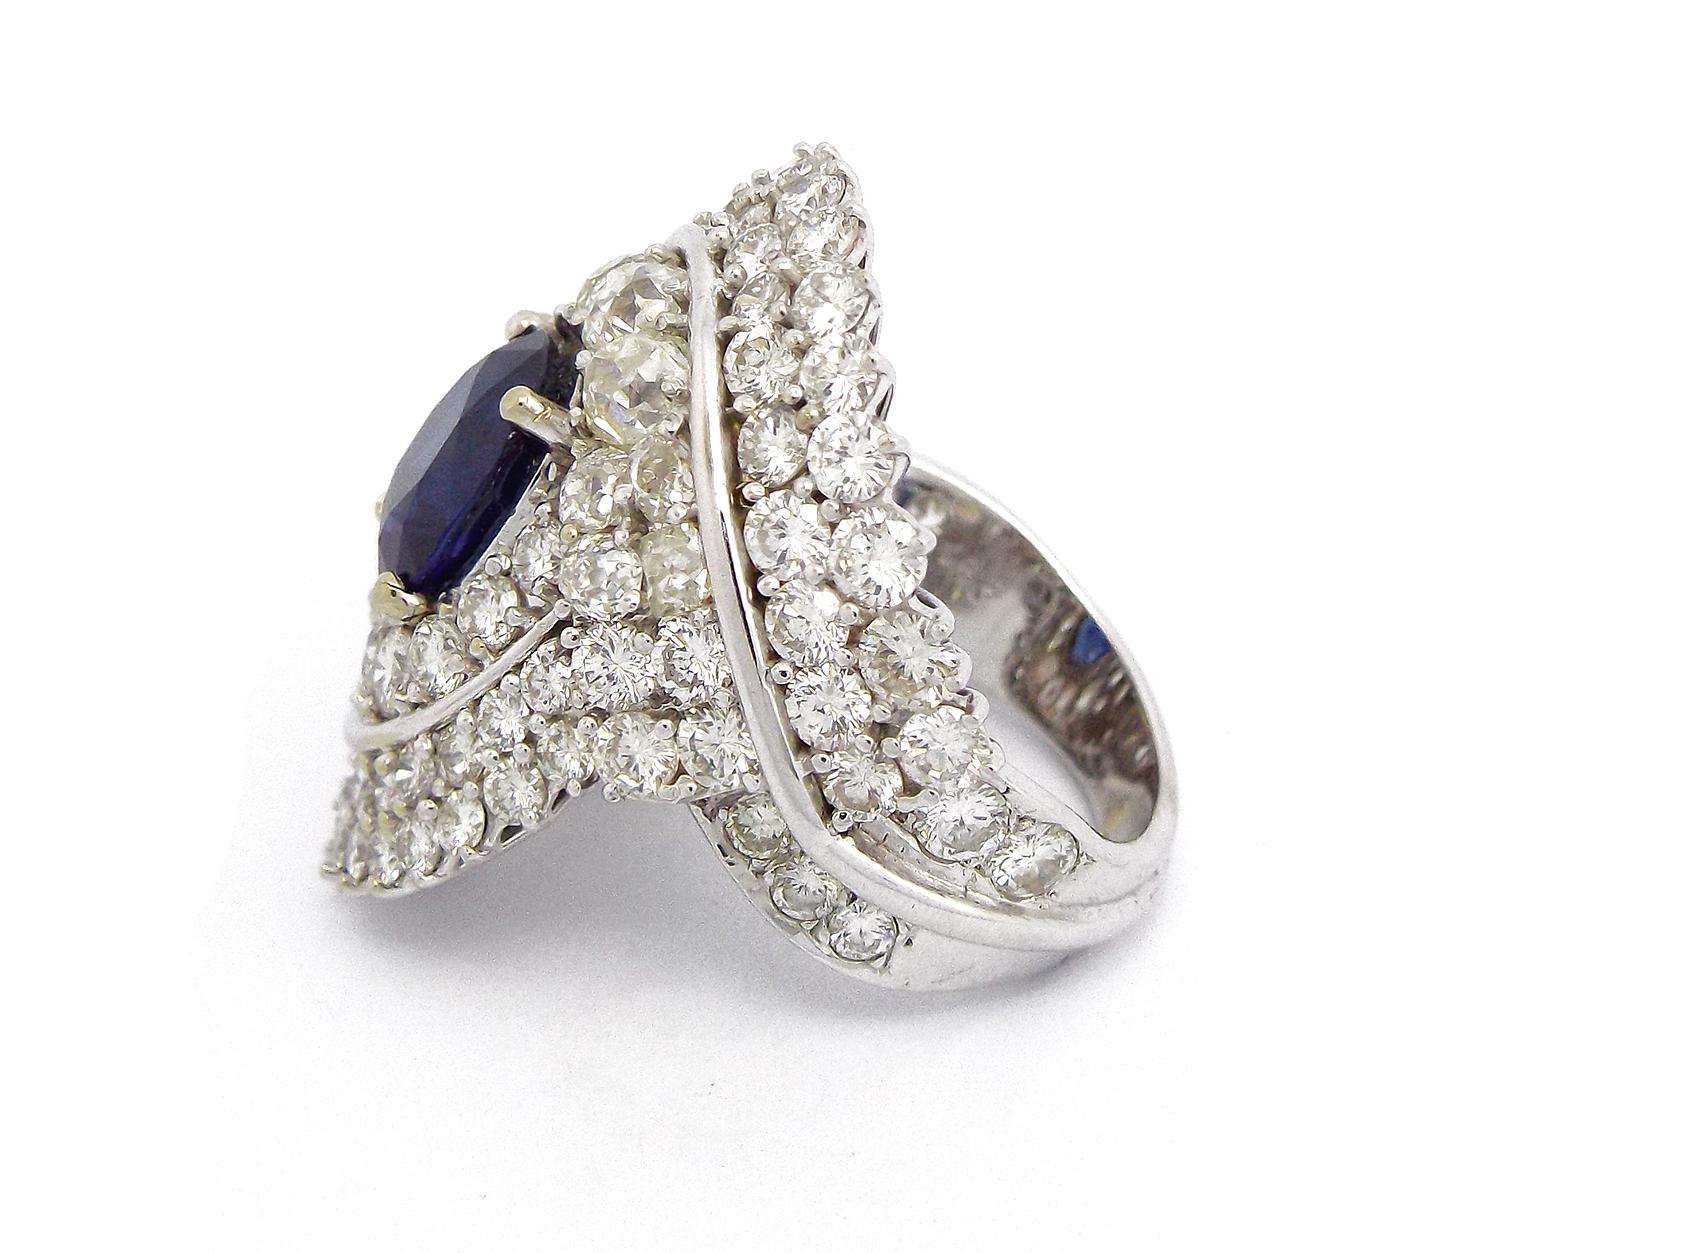 Diamond Ring centering a cushion sapphire, weighing approximately 5.08 carats, within a scrolled surround of old mine and round brilliant-cut diamonds; estimated total diamond weight: 9.60 carats; mounted in 18k white gold; 
Total Weight: